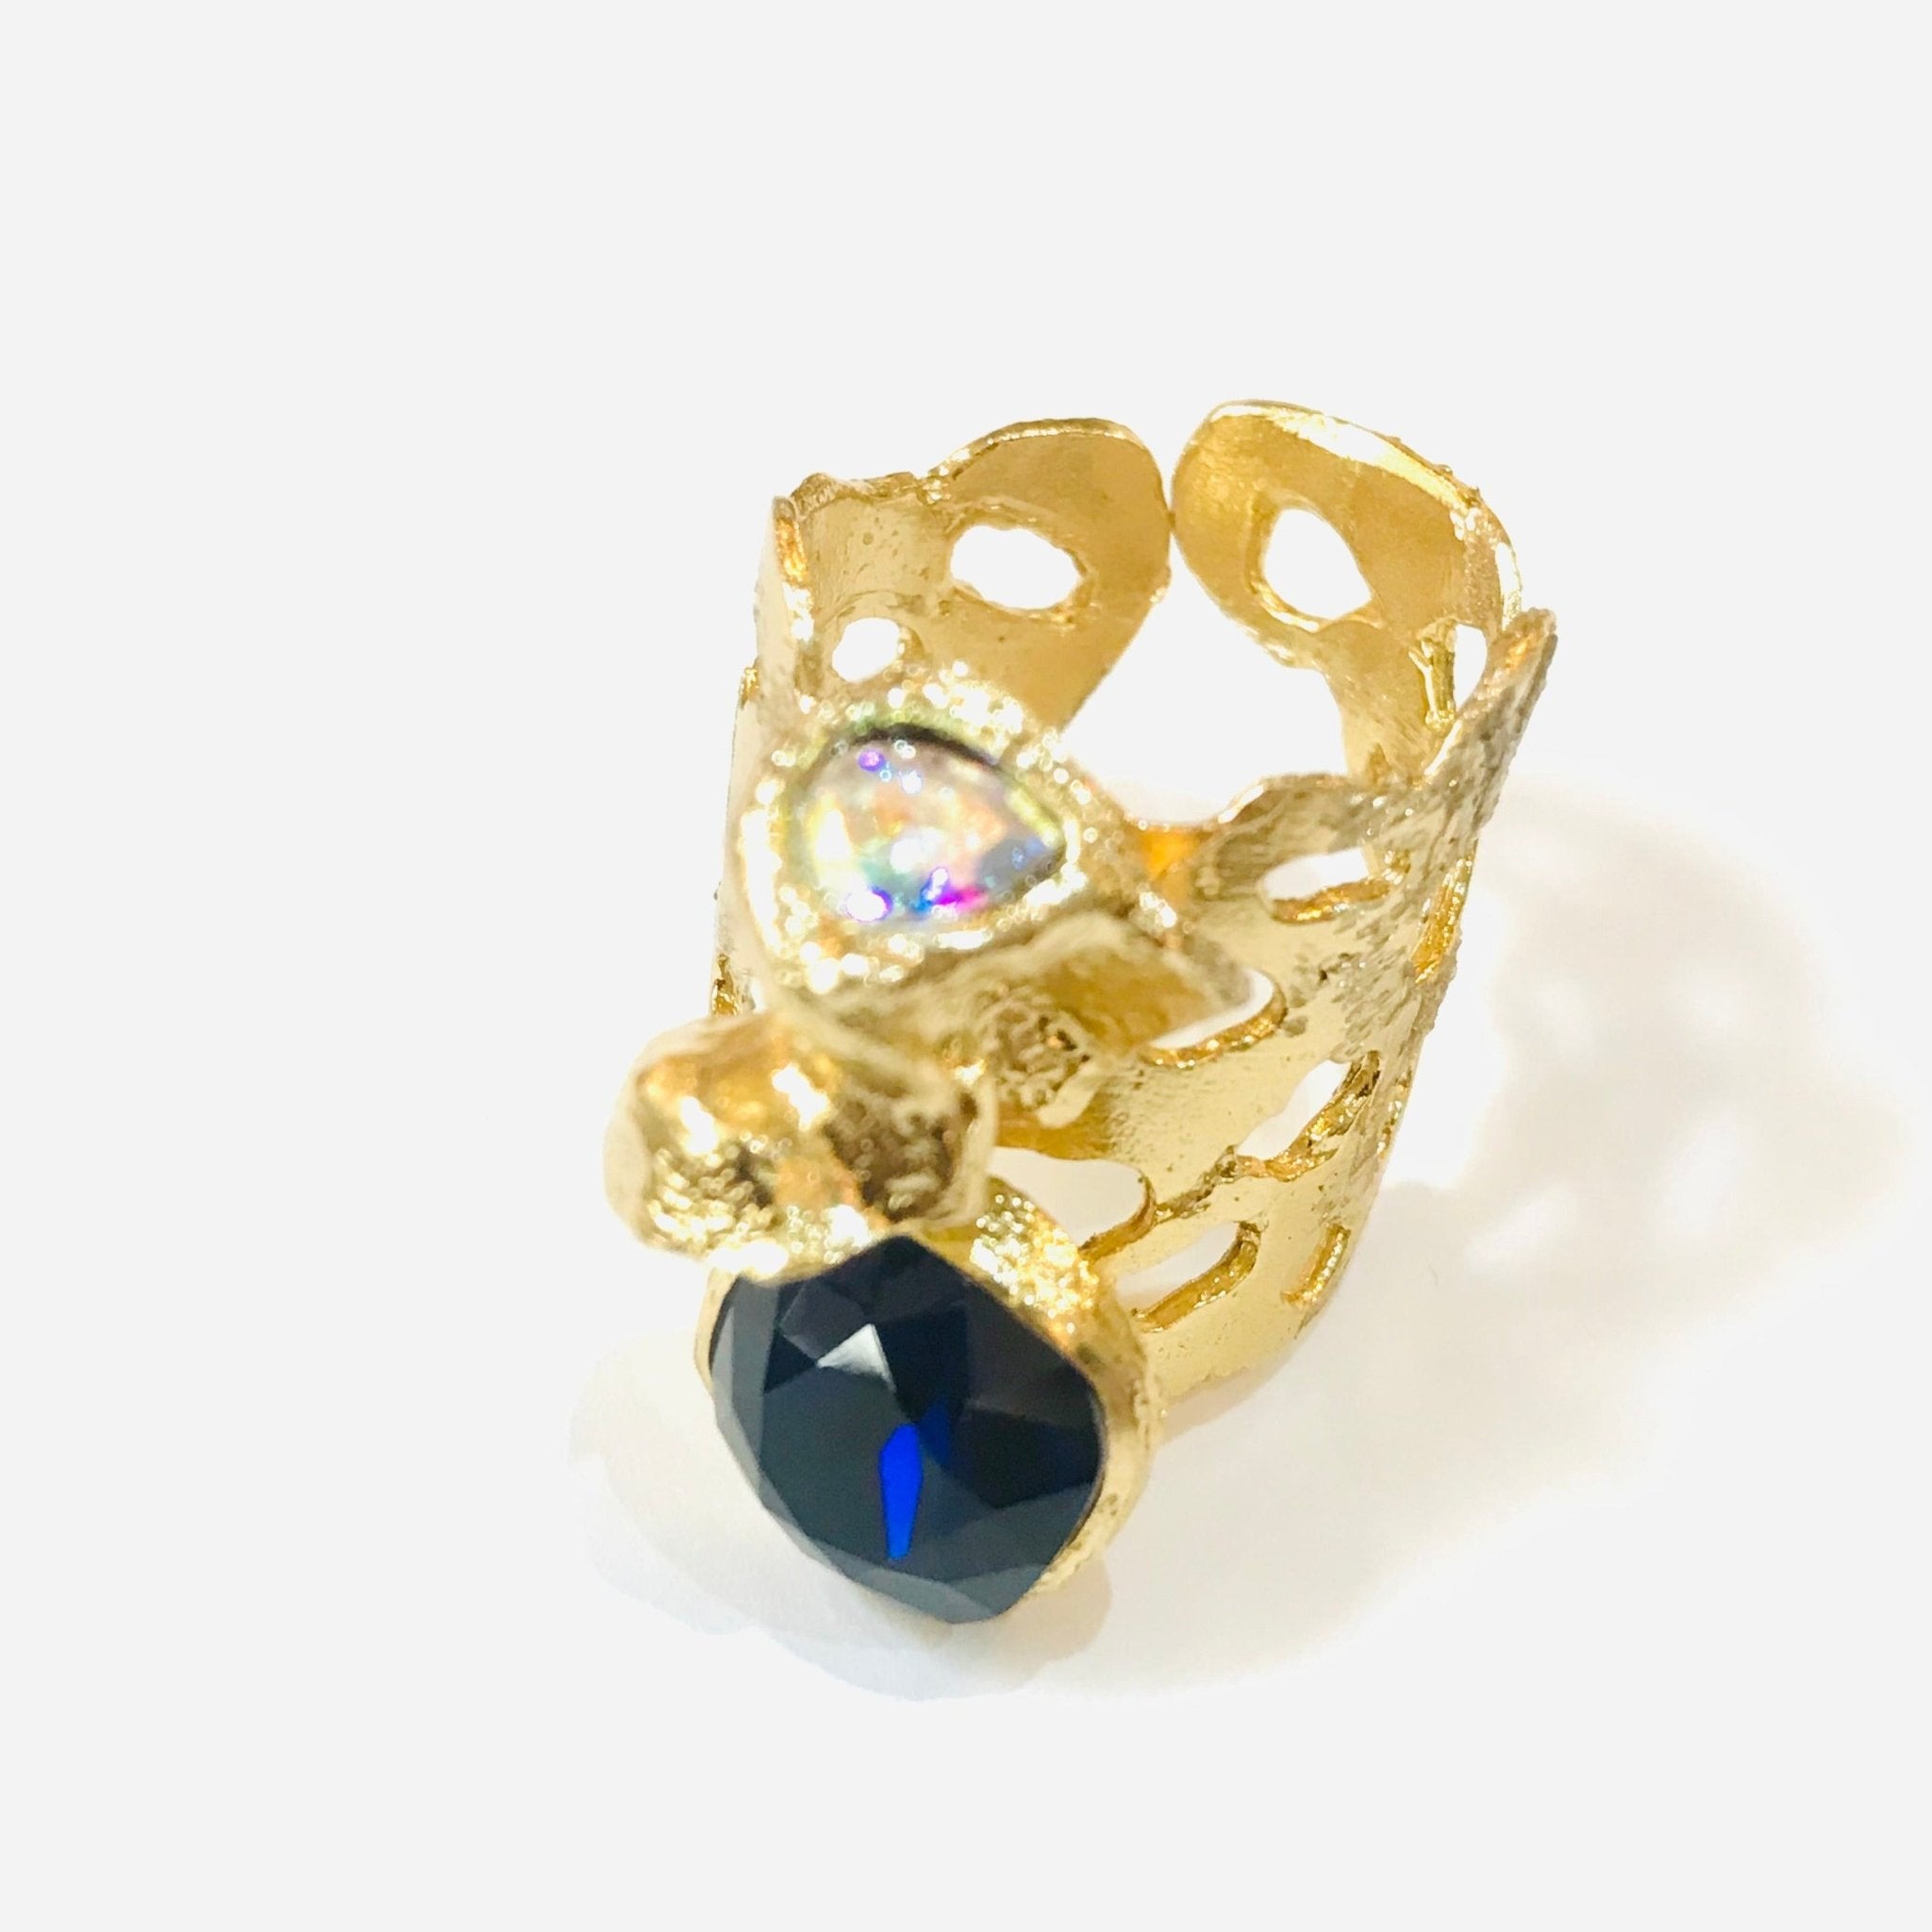 Supersonic Ring - The Nancy Smillie Shop - Art, Jewellery & Designer Gifts Glasgow